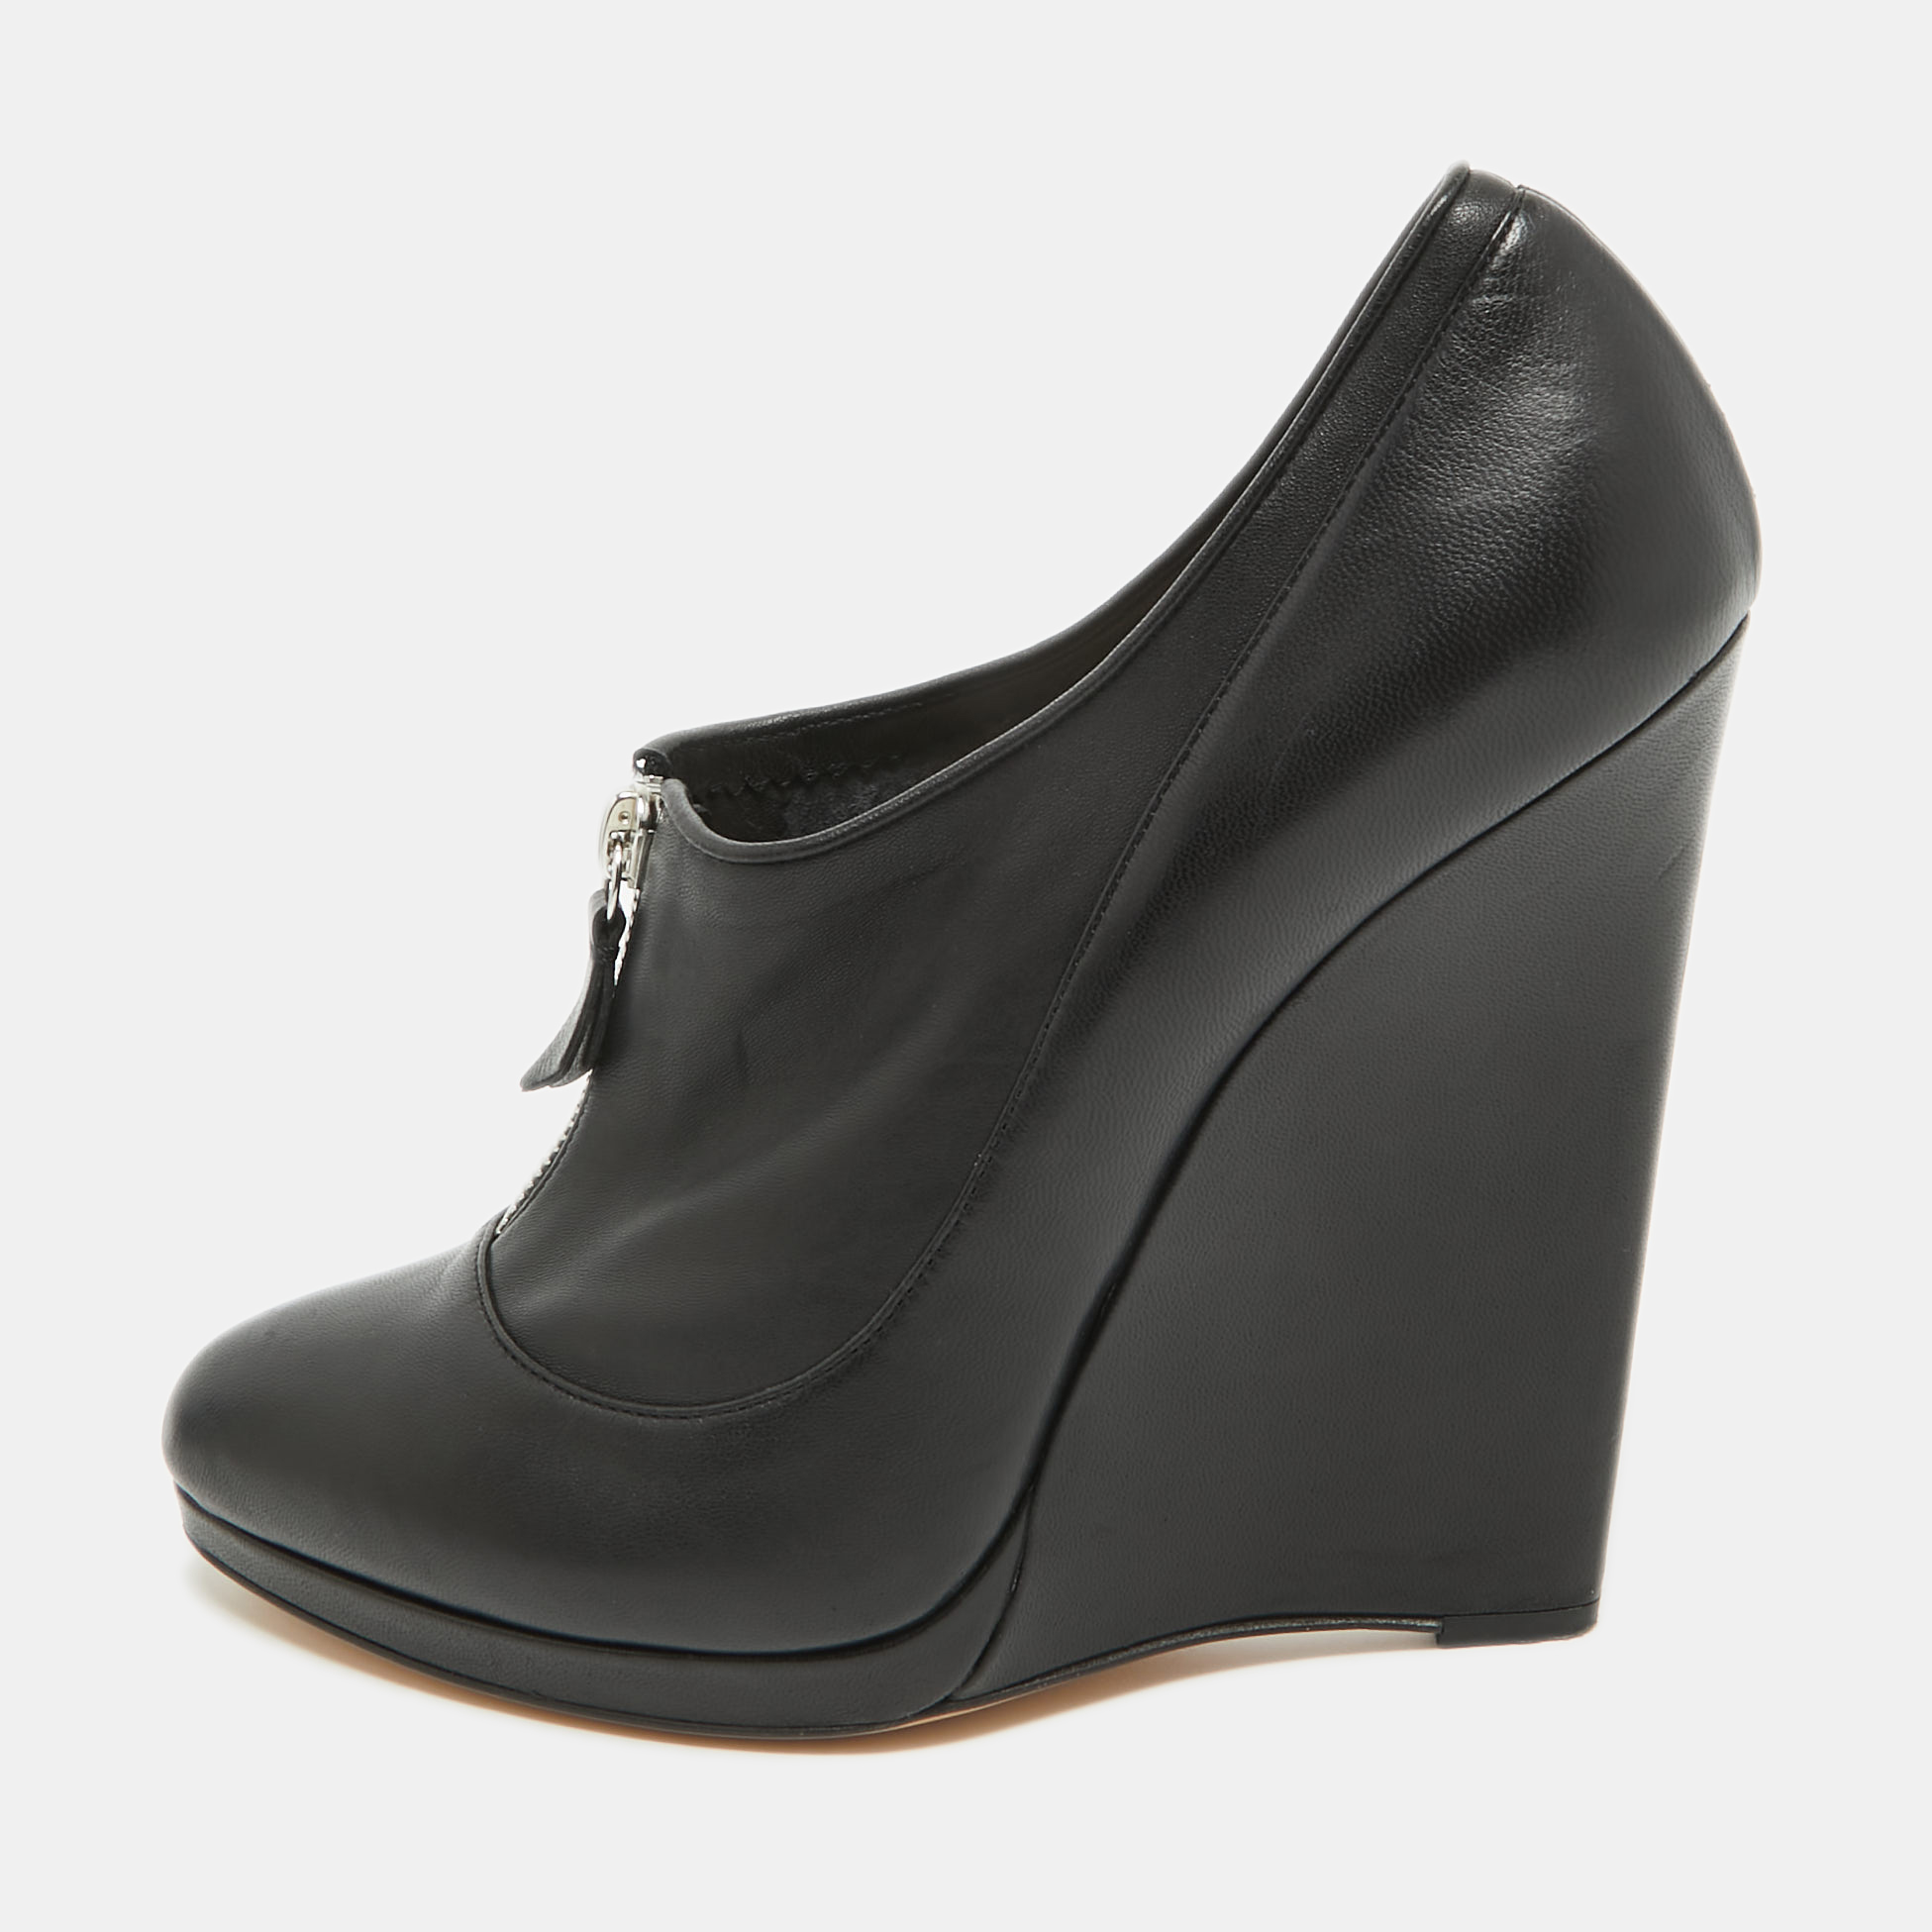 Casadei Black Leather Wedge Platform Ankle Booties Size 39